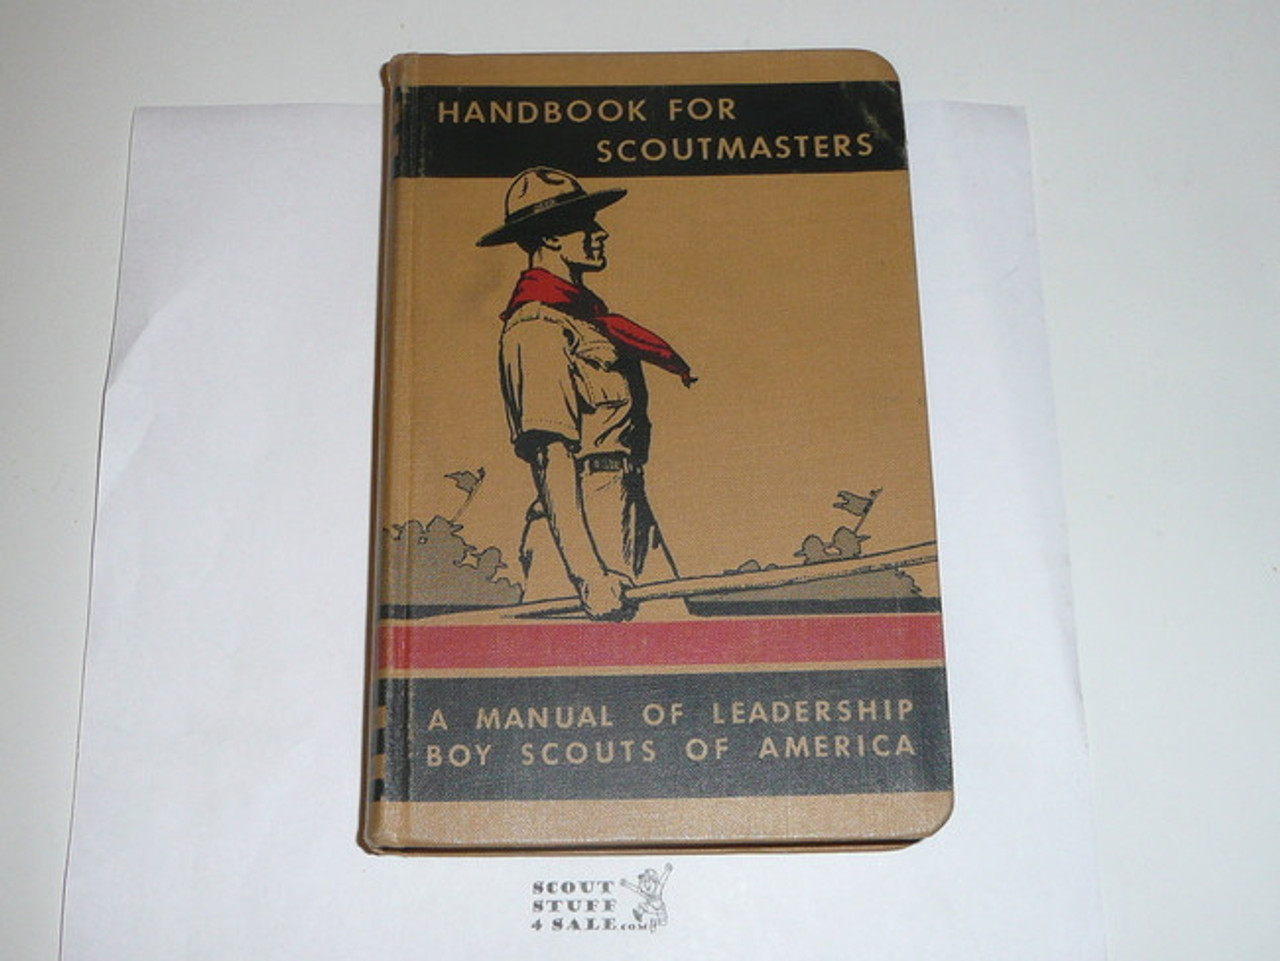 1943 Handbook For Scoutmasters, Third Edition, Volume 1, Ninth printing (Feb-43), MINT Condition